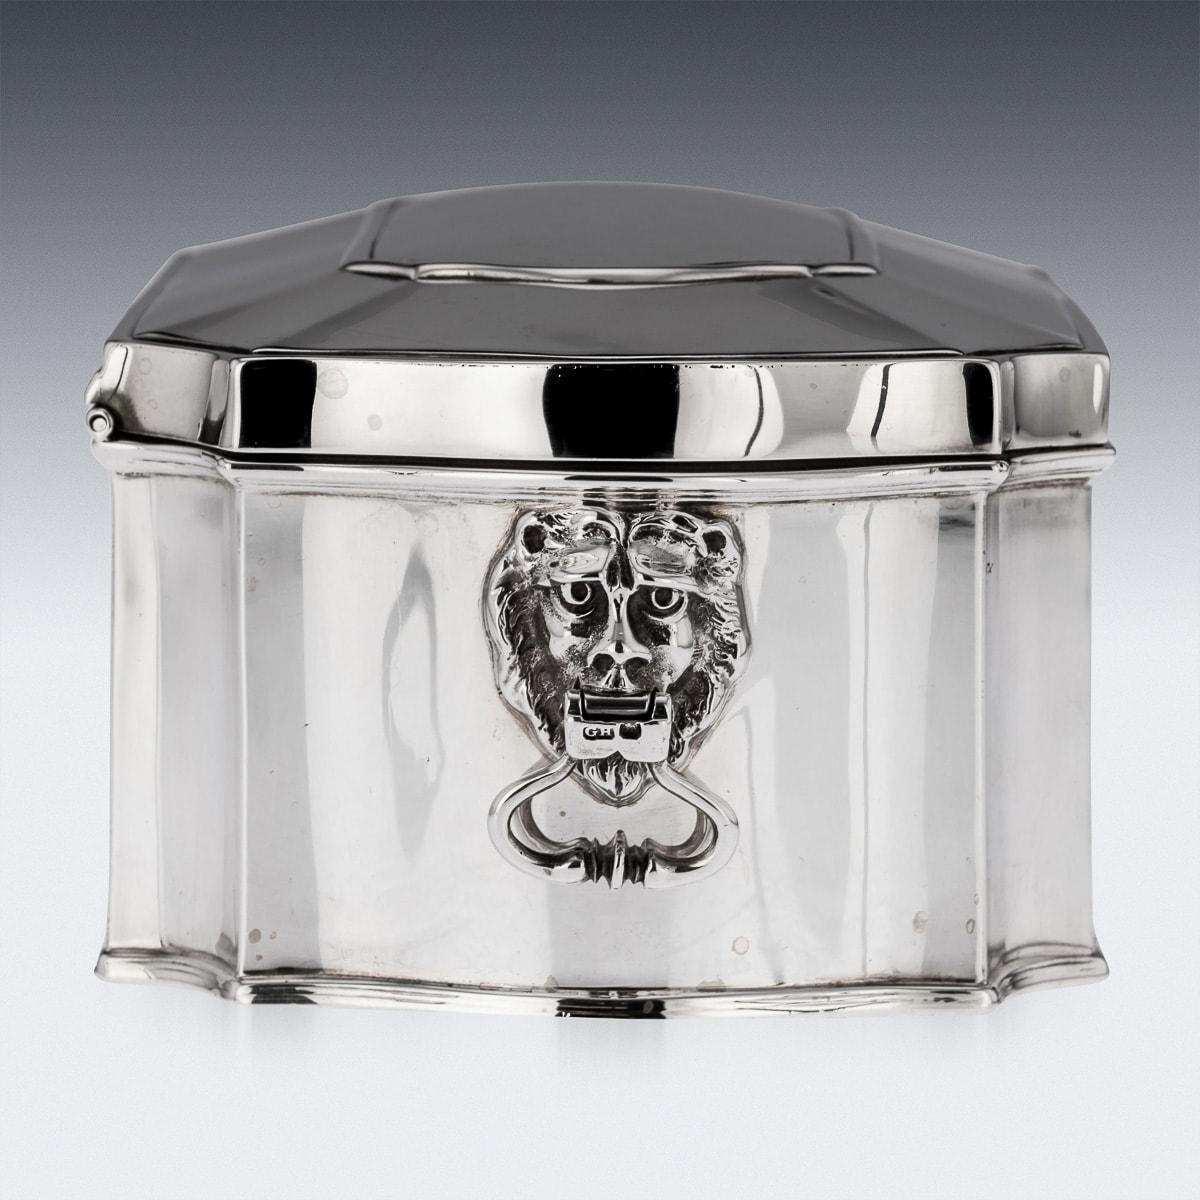 20th Century English Solid Silver Casket, Sheffield, c.1915 For Sale 1